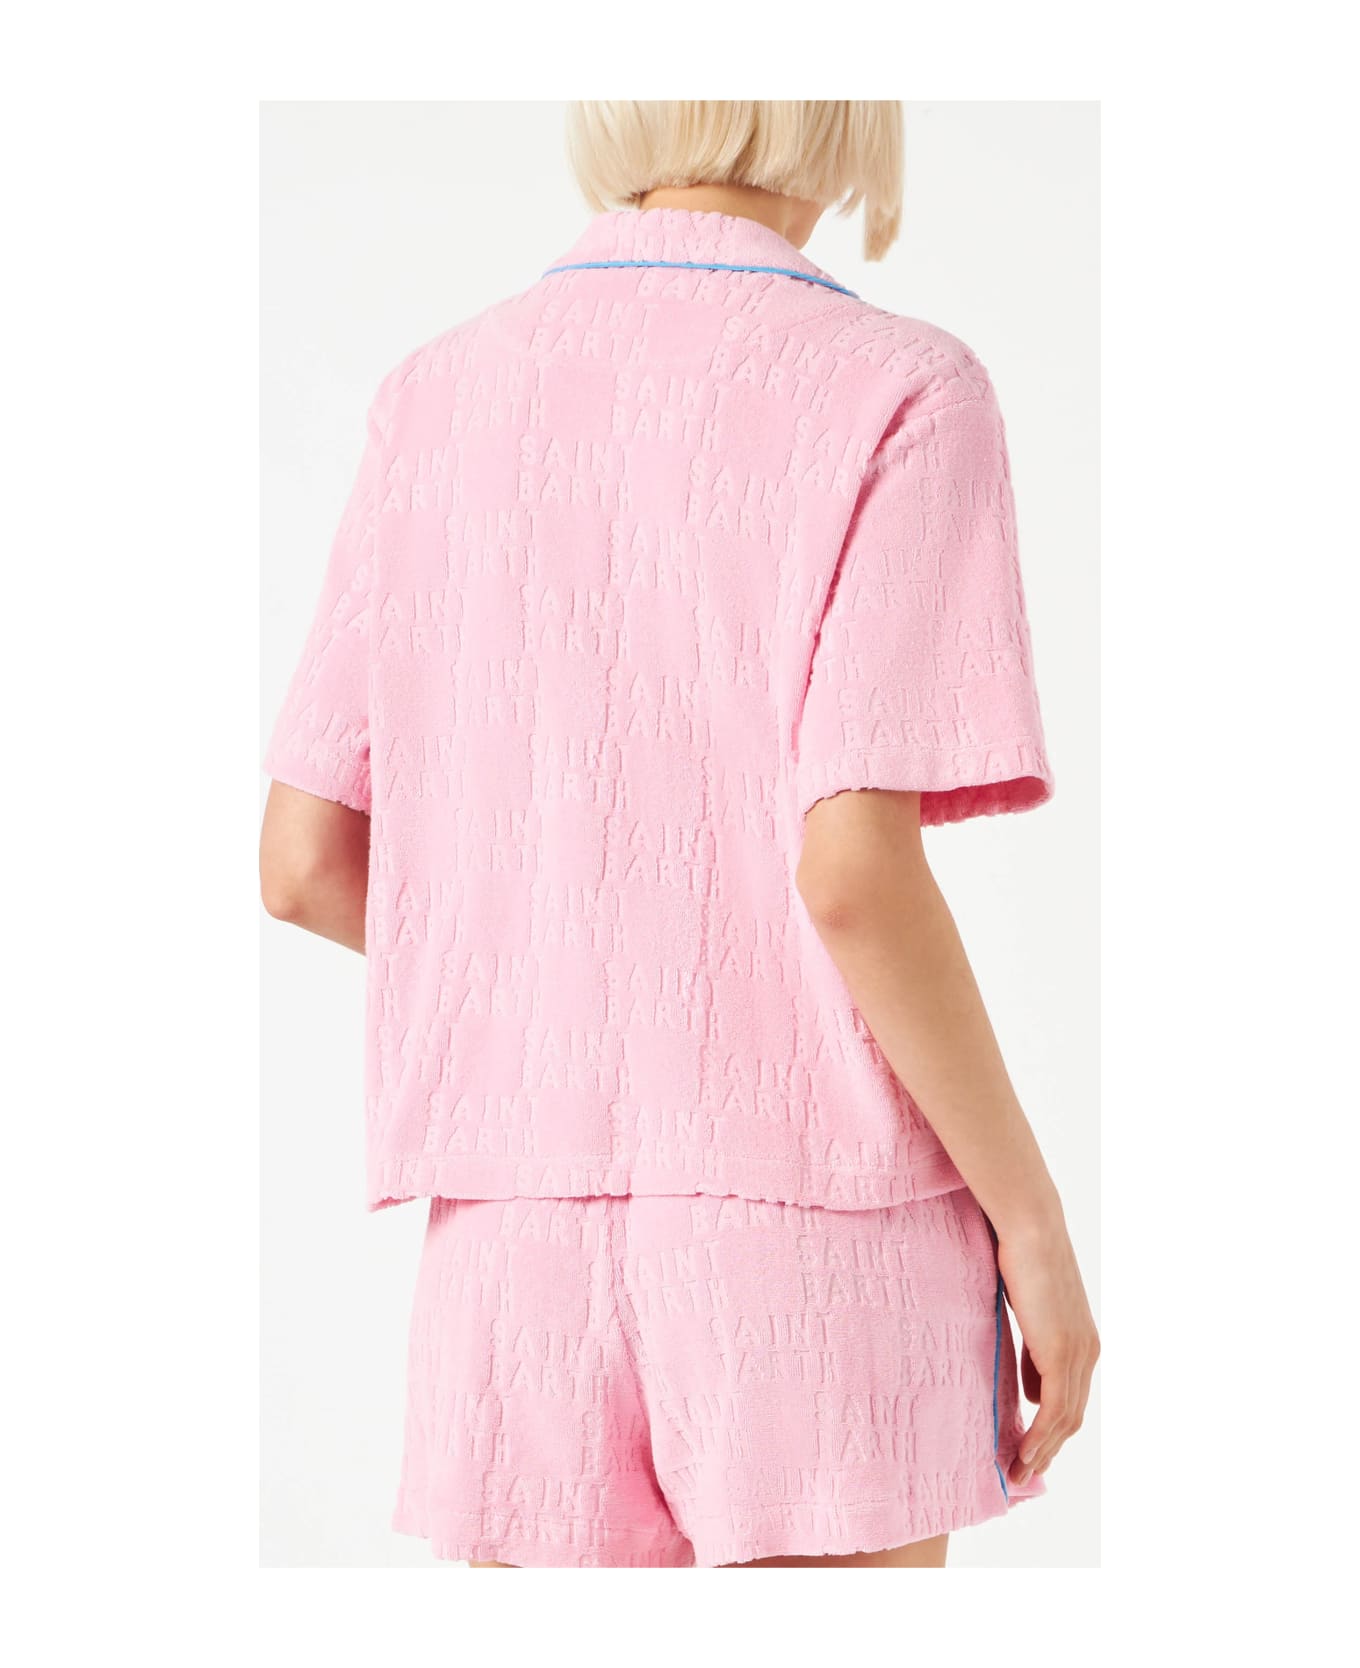 MC2 Saint Barth Woman Terry Embossed Shirt With Piping - PINK